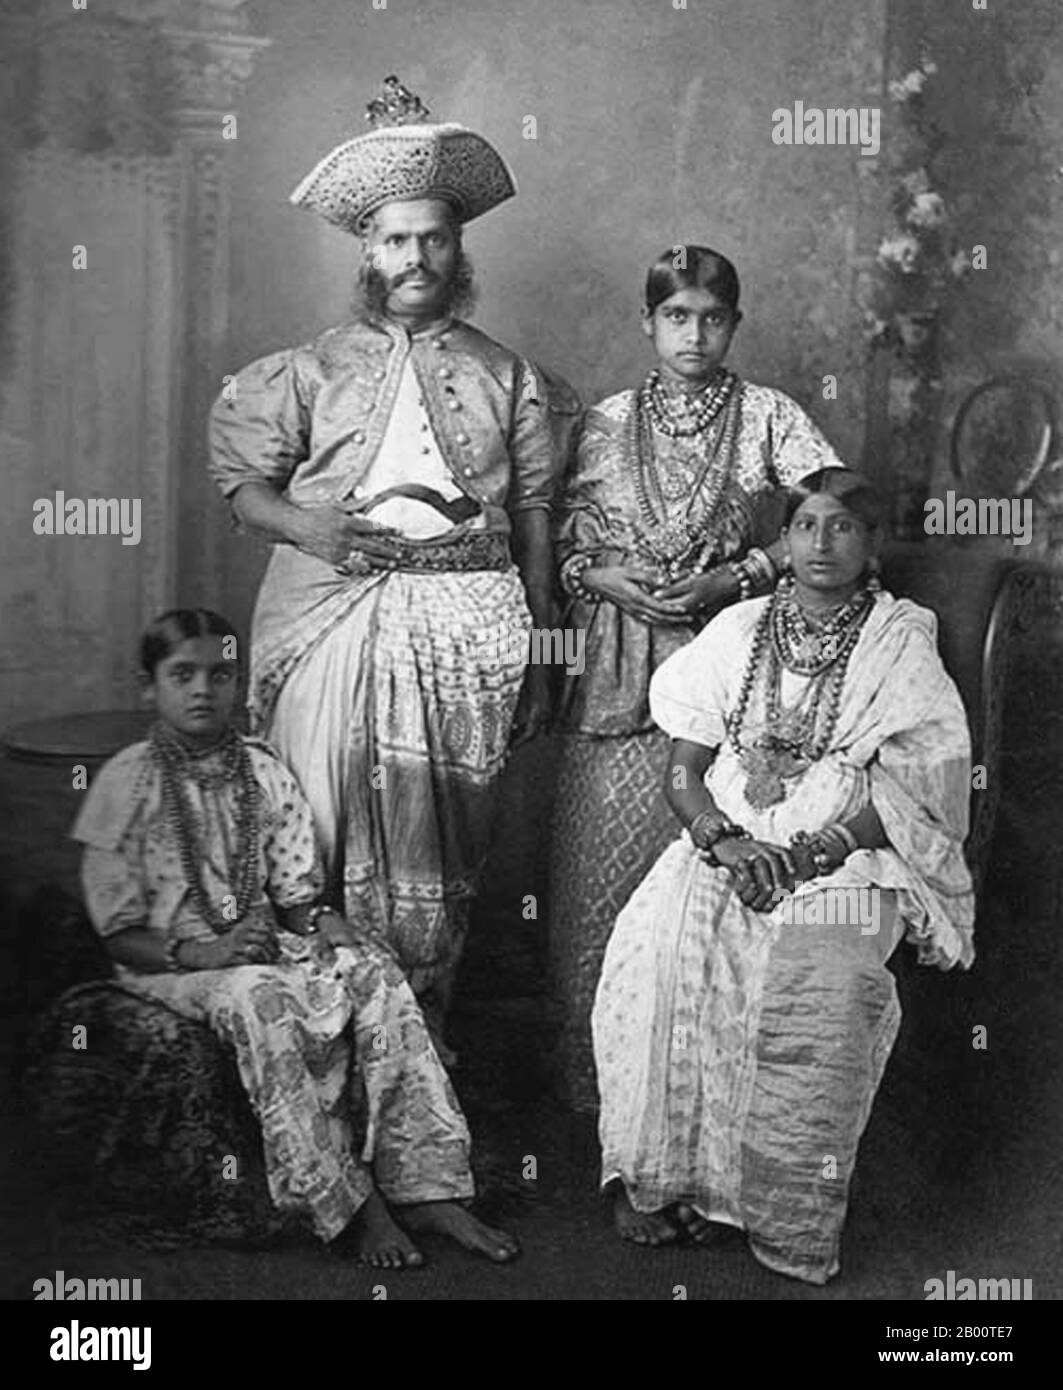 Sri Lanka: Portrait of an aristocratic Sinhalese family from Kandy. Photo by Charles T. Scowen (1852-1948), 1880s.  In 1592 Kandy became the capital city of the last remaining independent kingdom in Sri Lanka after the coastal regions had been conquered by the Portuguese. Kandy stayed independent until the early 19th century. In the Second Kandyan War, the British met no resistance and reached the city on February 10, 1815. On March 2, 1815, a treaty known as the Kandyan Convention was signed between the British and the Radalas (Kandyan aristocrats), which made Kandy a British protectorate. Stock Photo